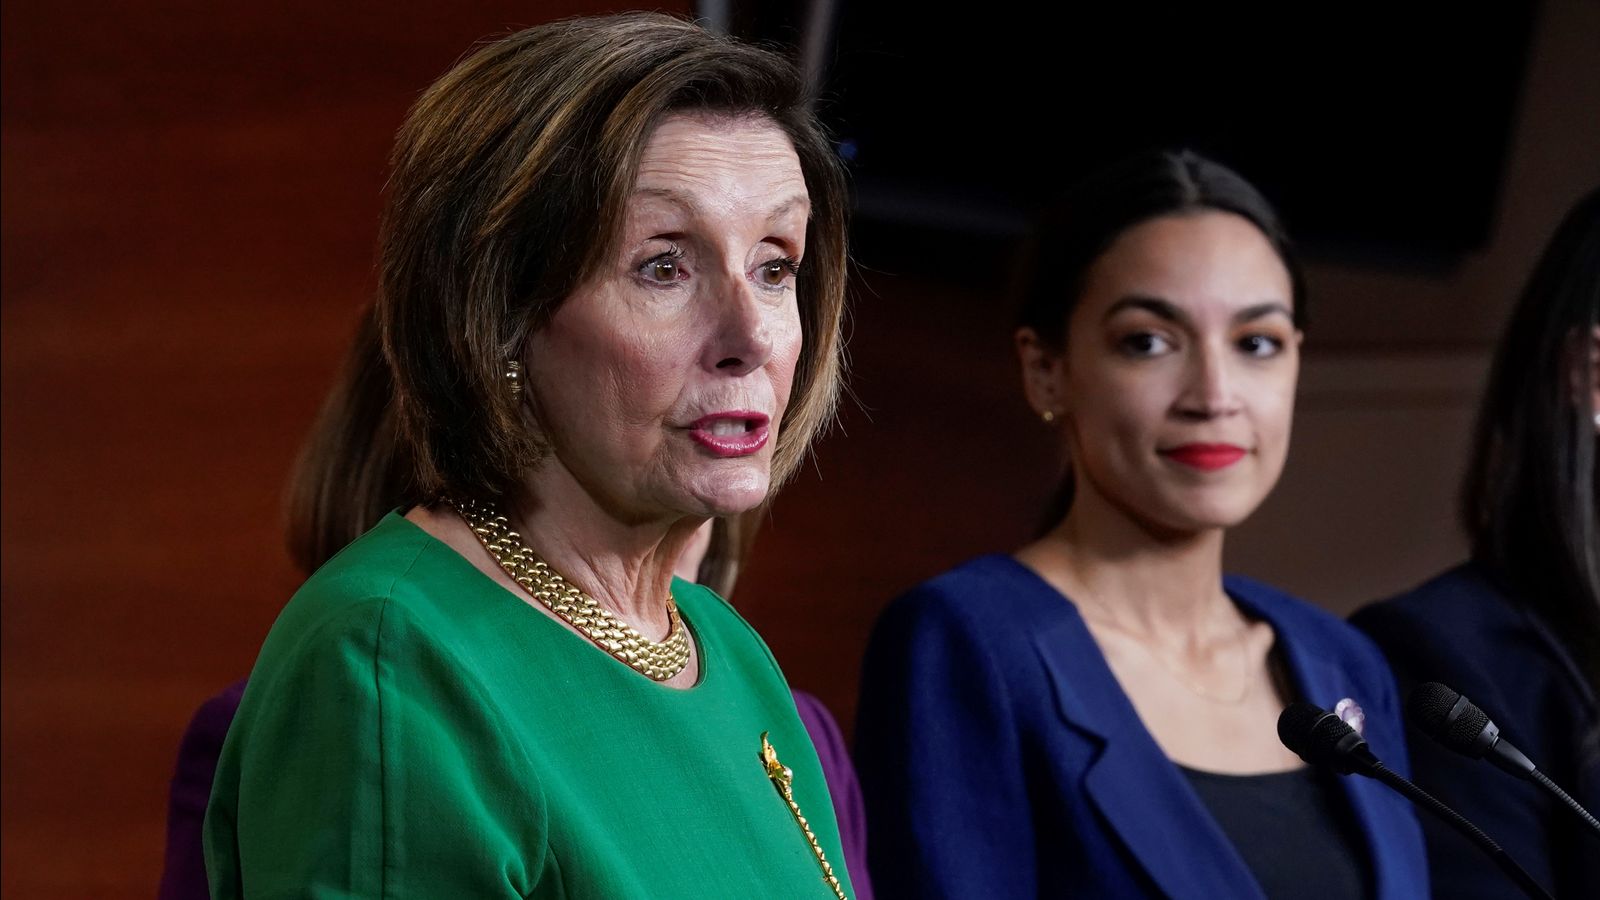 AOC: The Biden Administration's Rightward Turn Is “a Profound